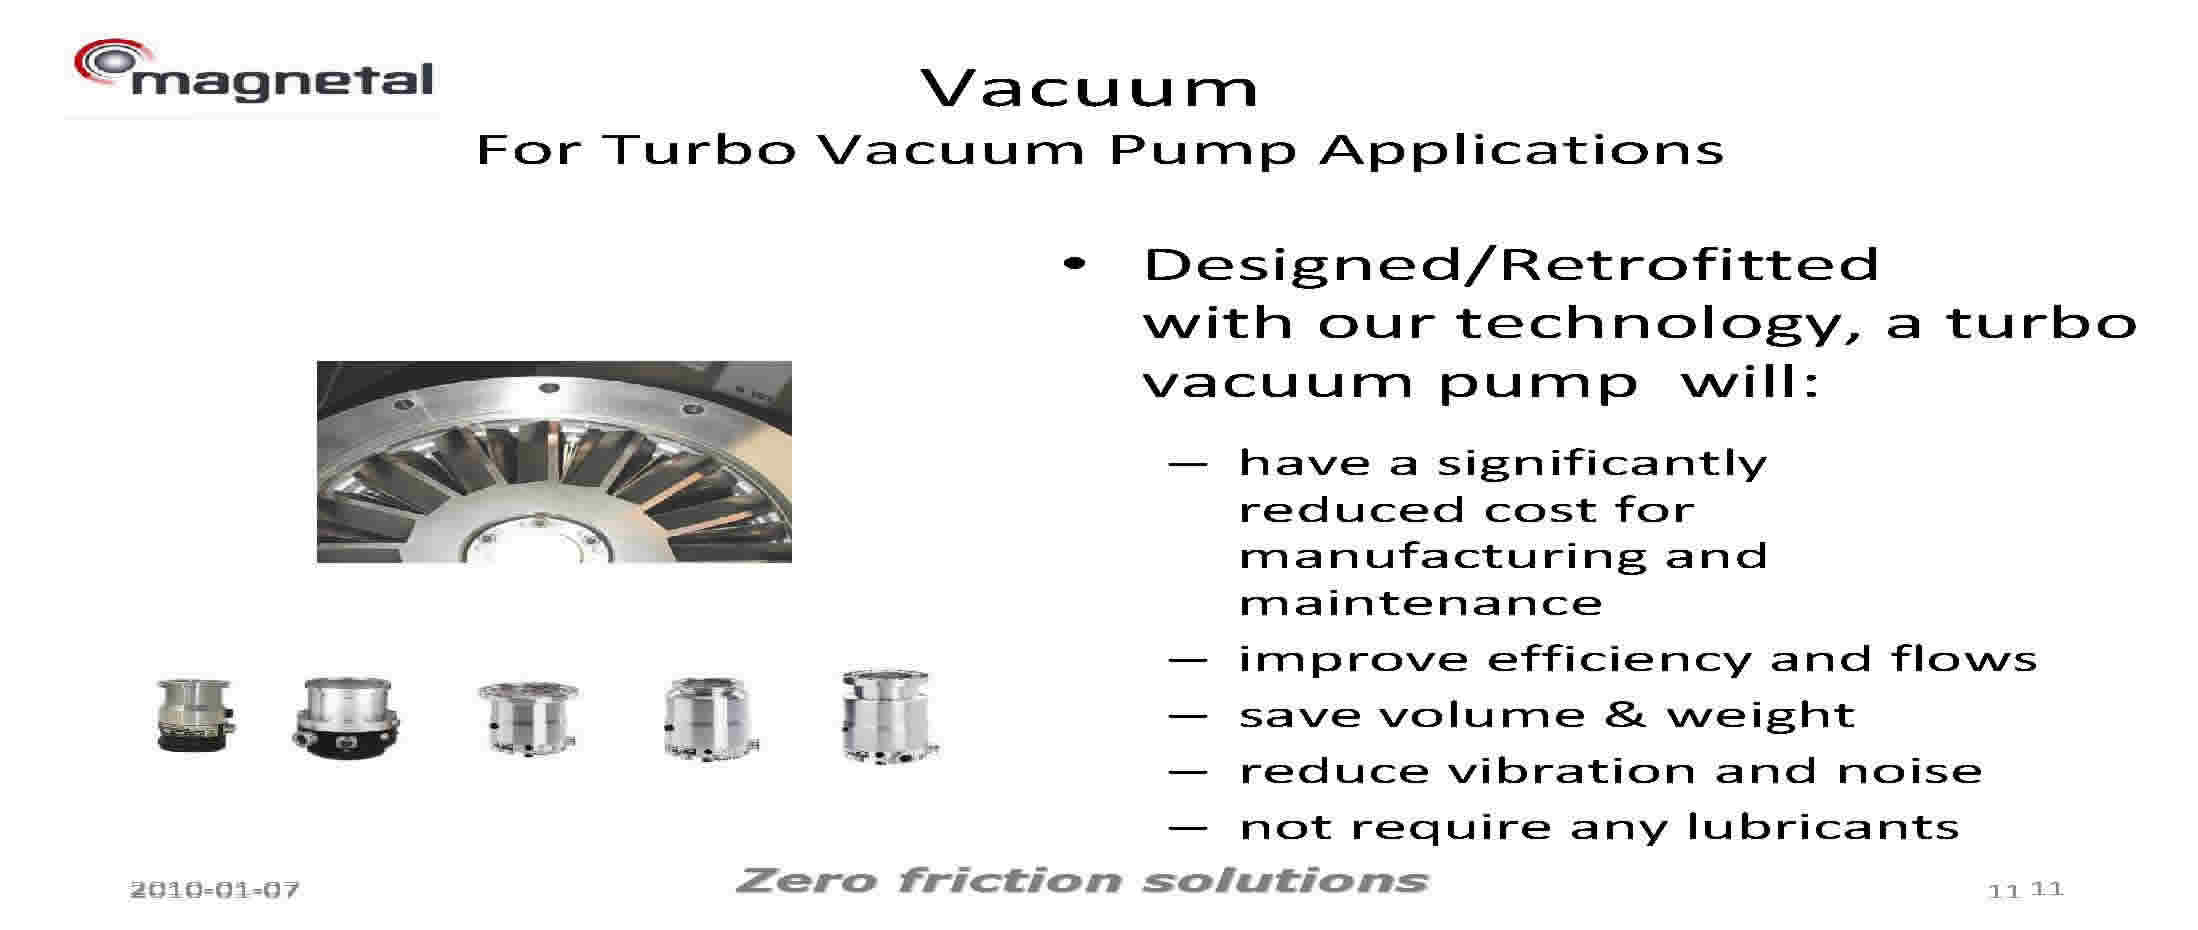 Added Value to Vacuum Industry by Using Magnetal Passive Magnetic Bearing Technology